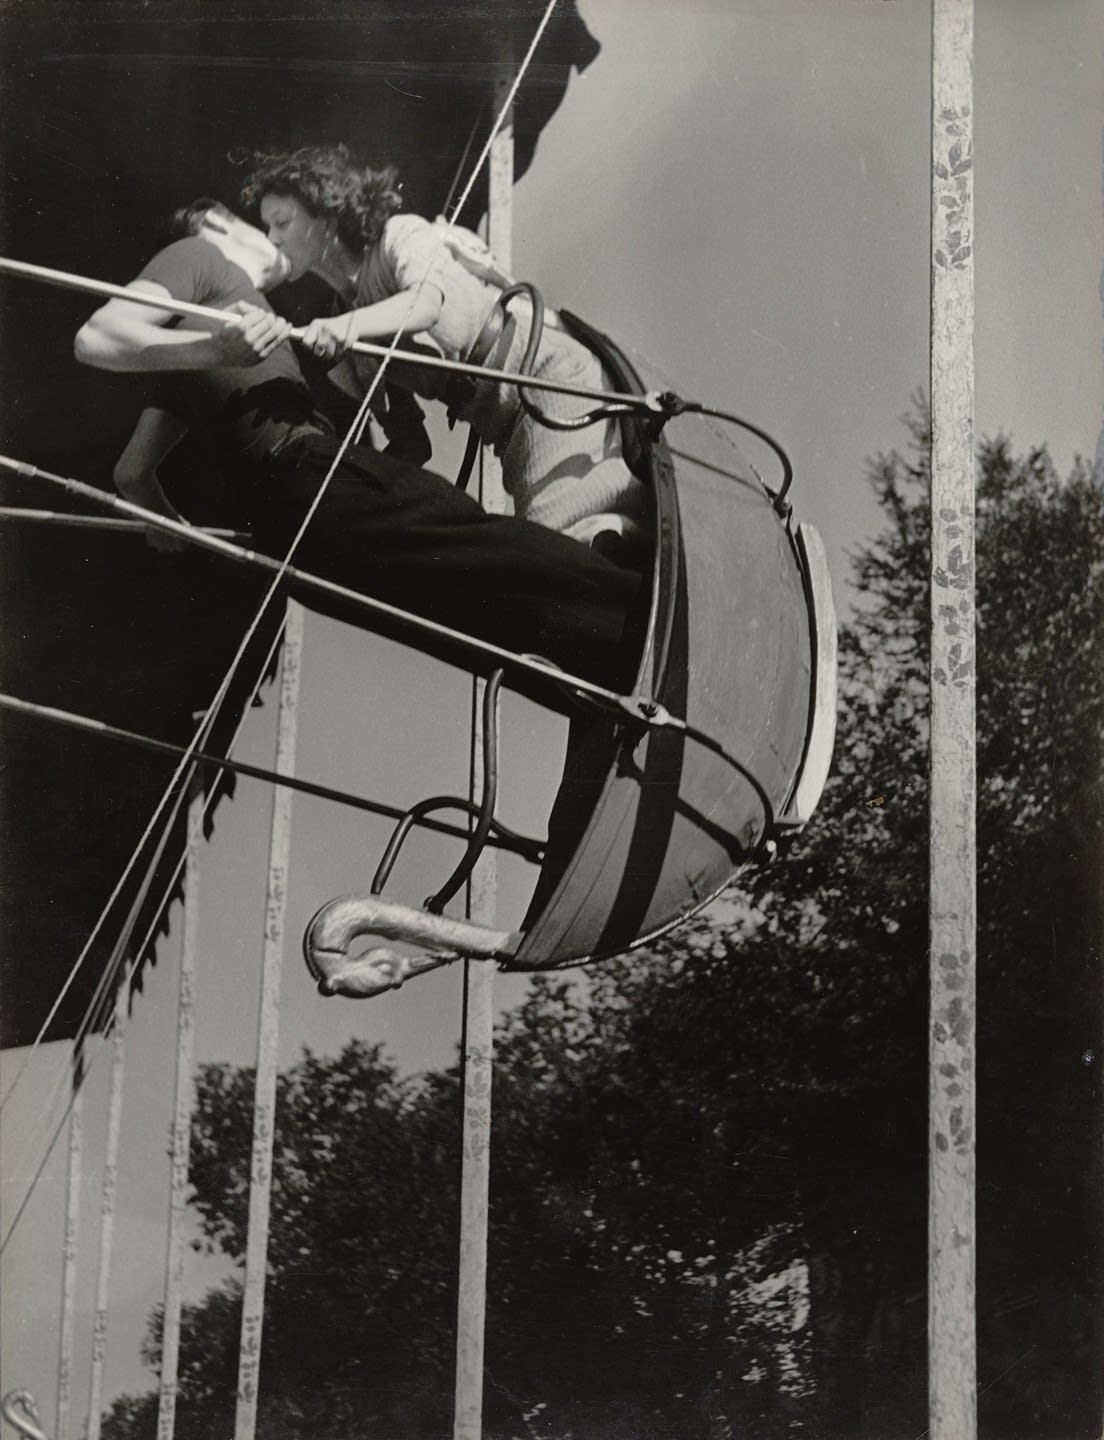 A kiss on a swing at the state fair, photographed by Brassai, 1936